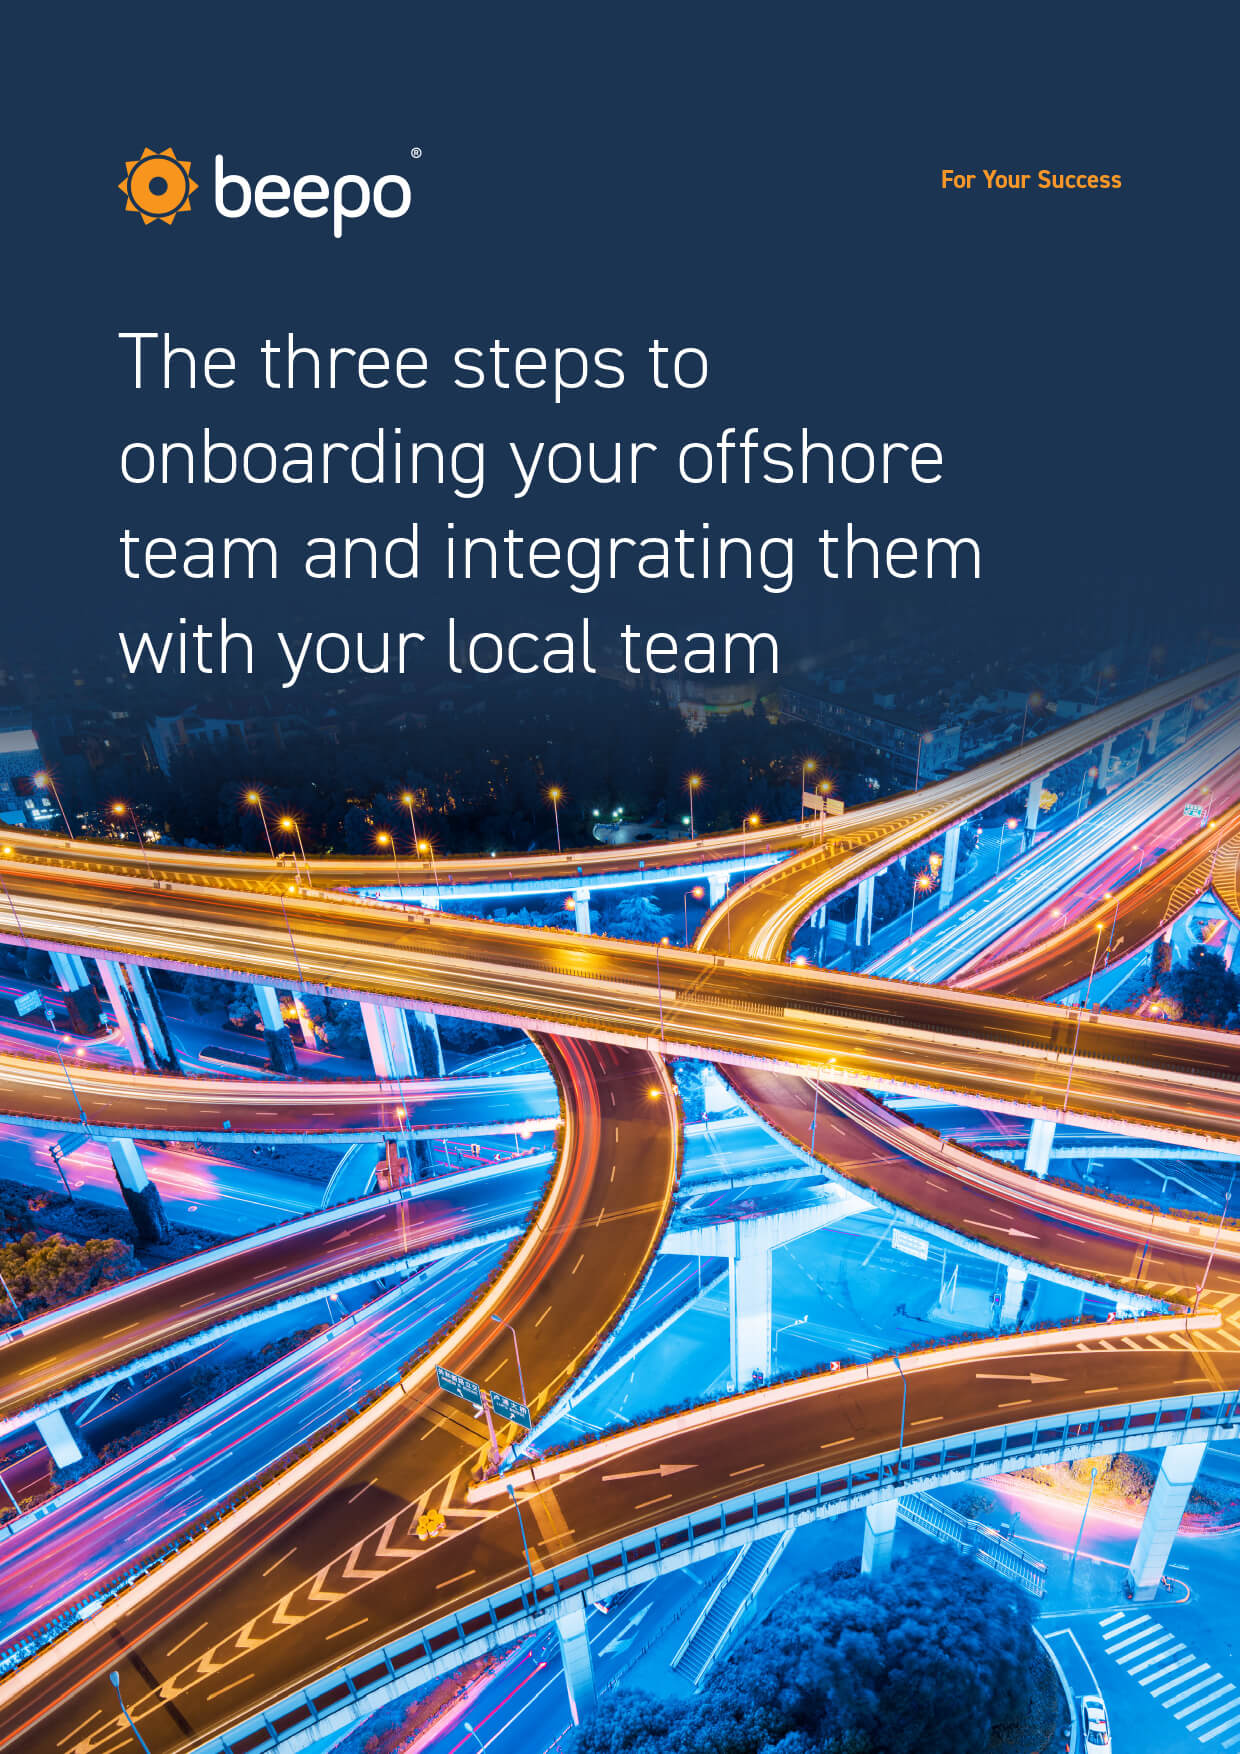 The three steps to onboarding your offshore team and integrating them with your local team